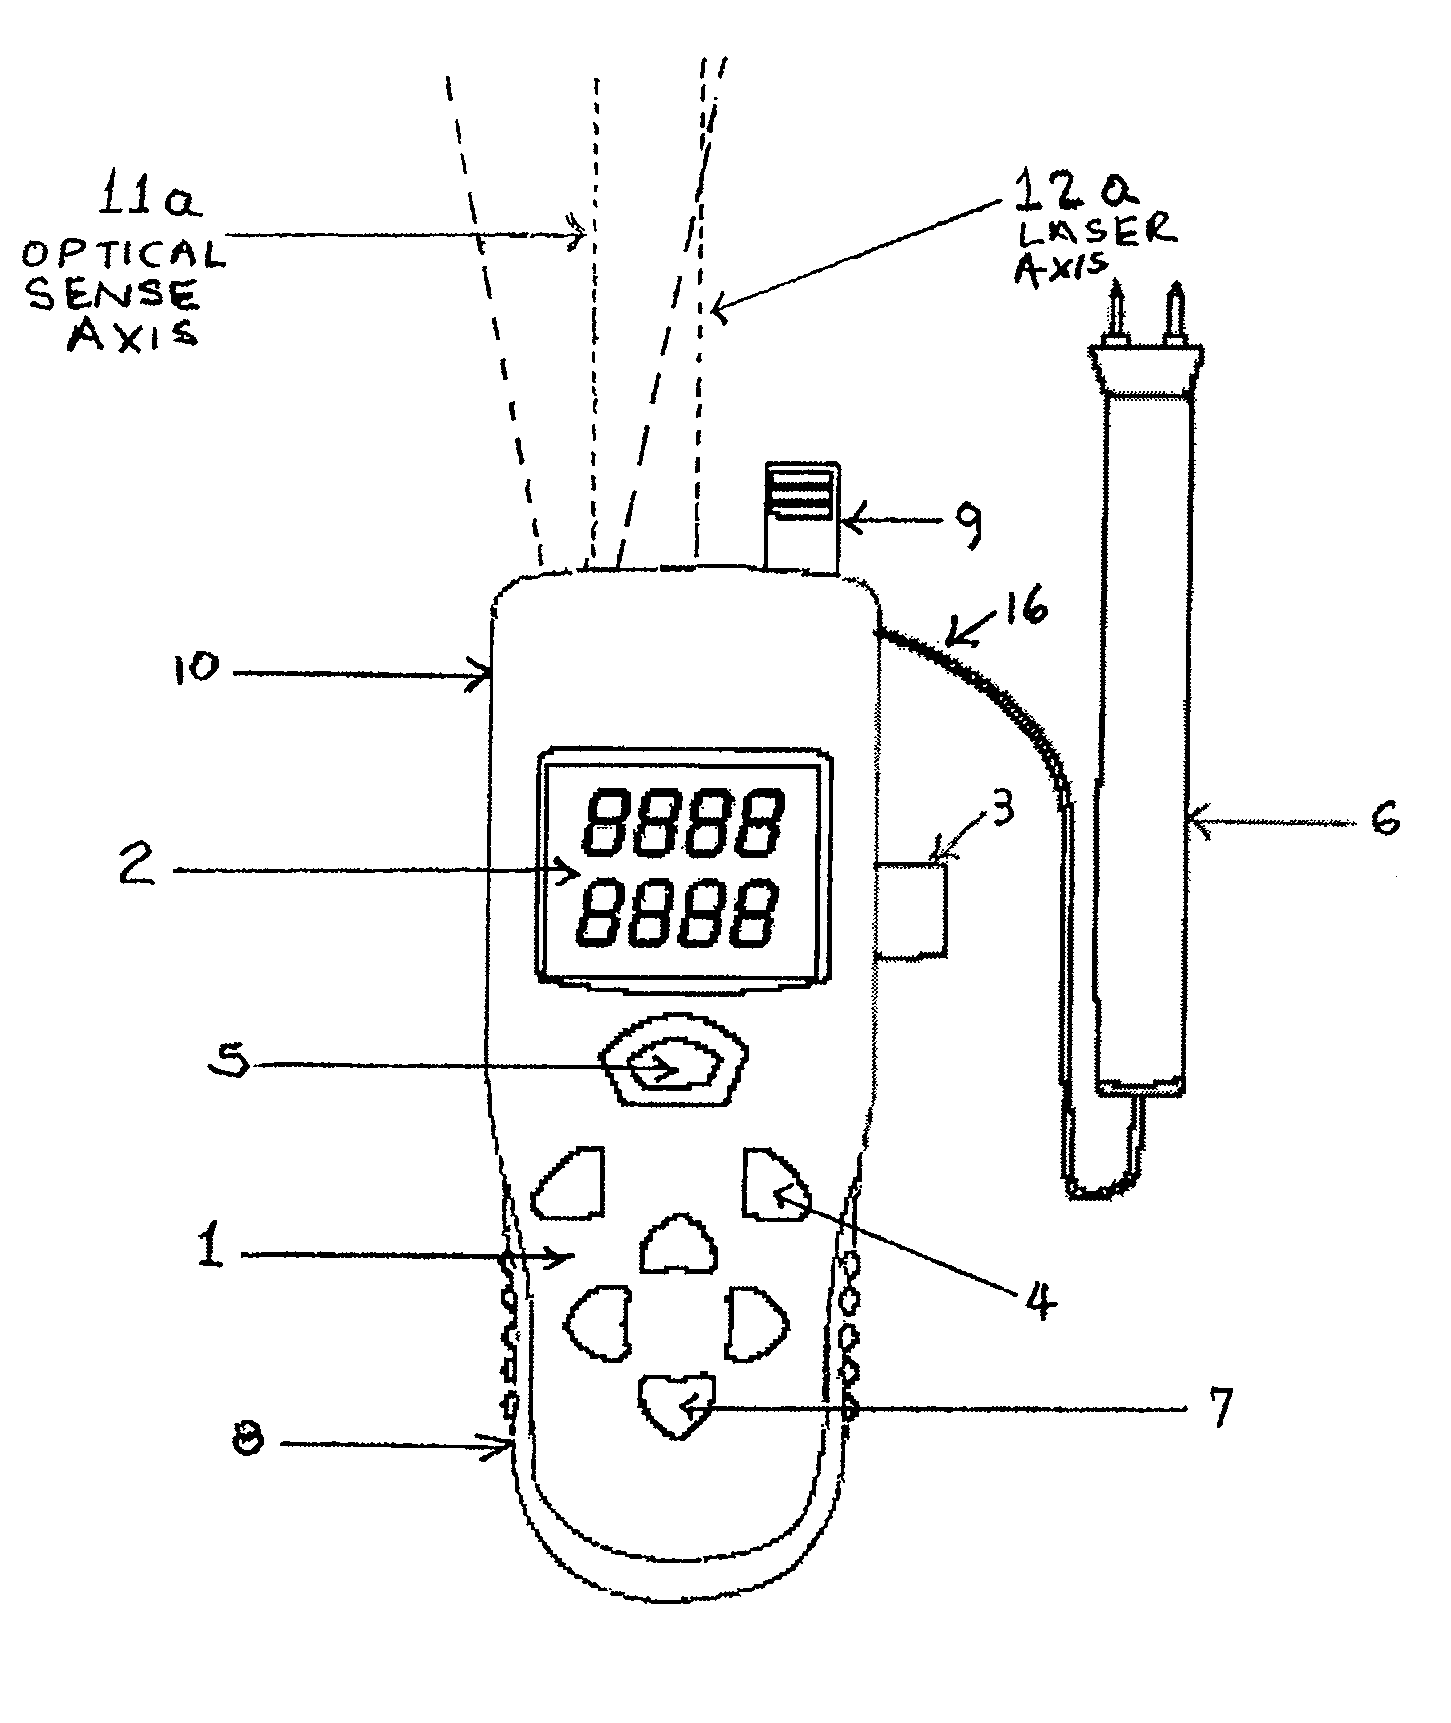 Moisture meter with non-contact infrared thermometer